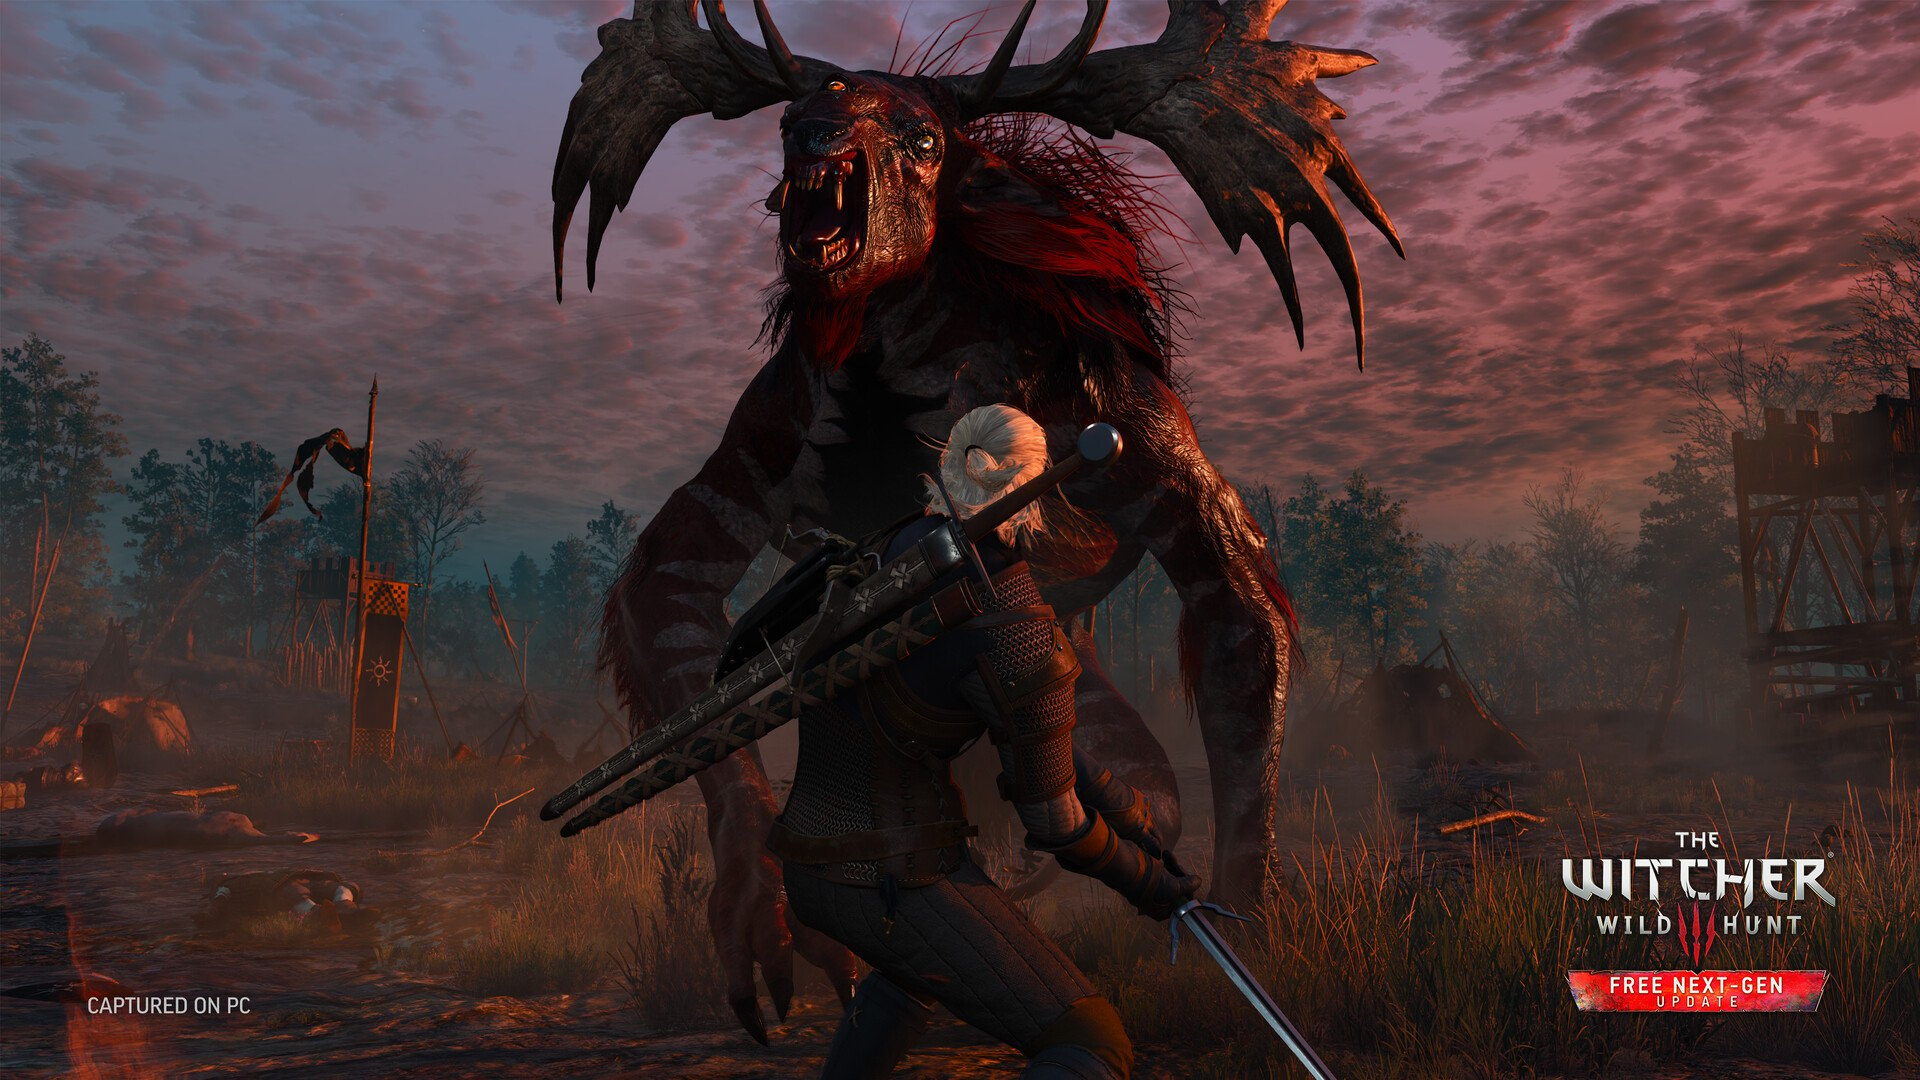 The Witcher 3 is Getting a Physical Launch for PS5 and Xbox Series